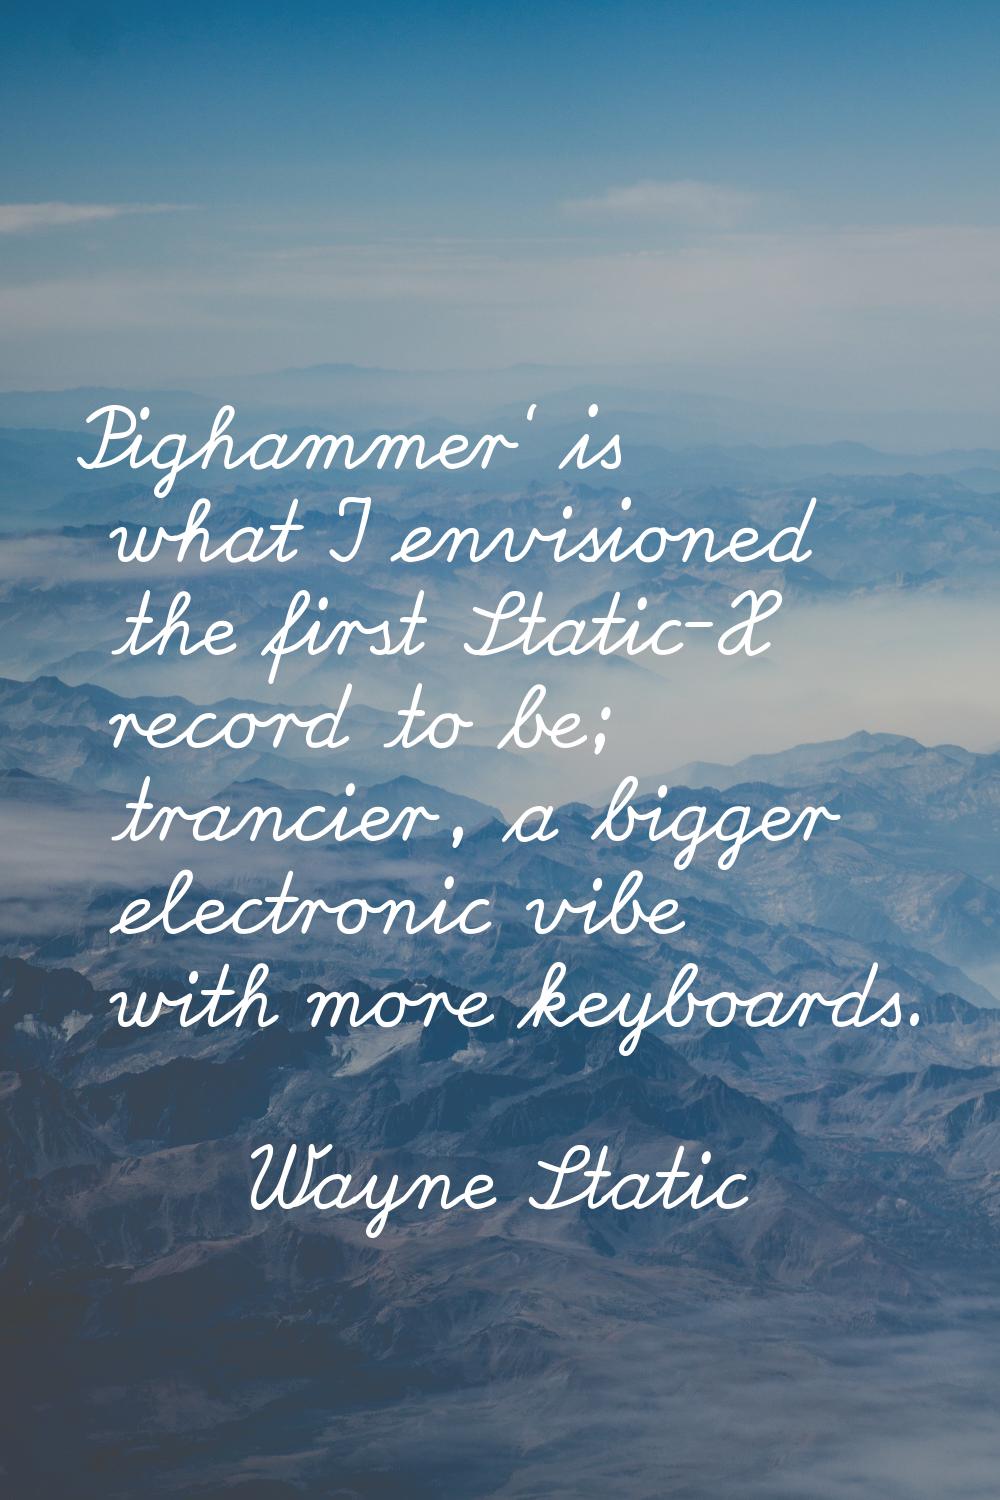 Pighammer' is what I envisioned the first Static-X record to be; trancier, a bigger electronic vibe